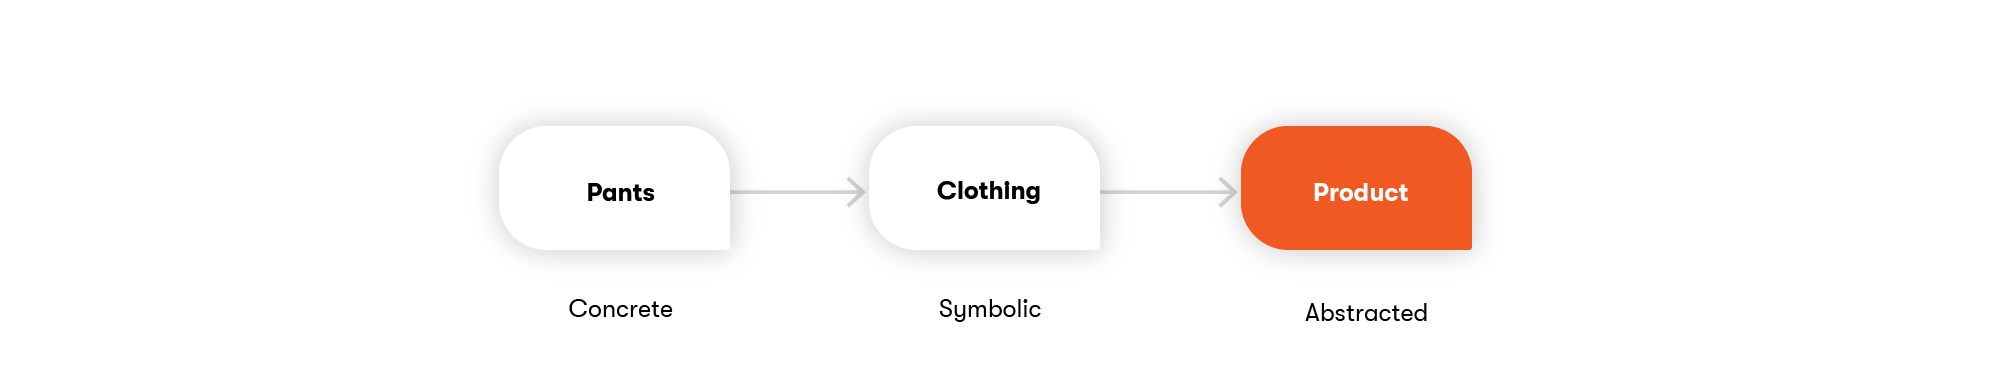 Example 2: E-commerce clothing store